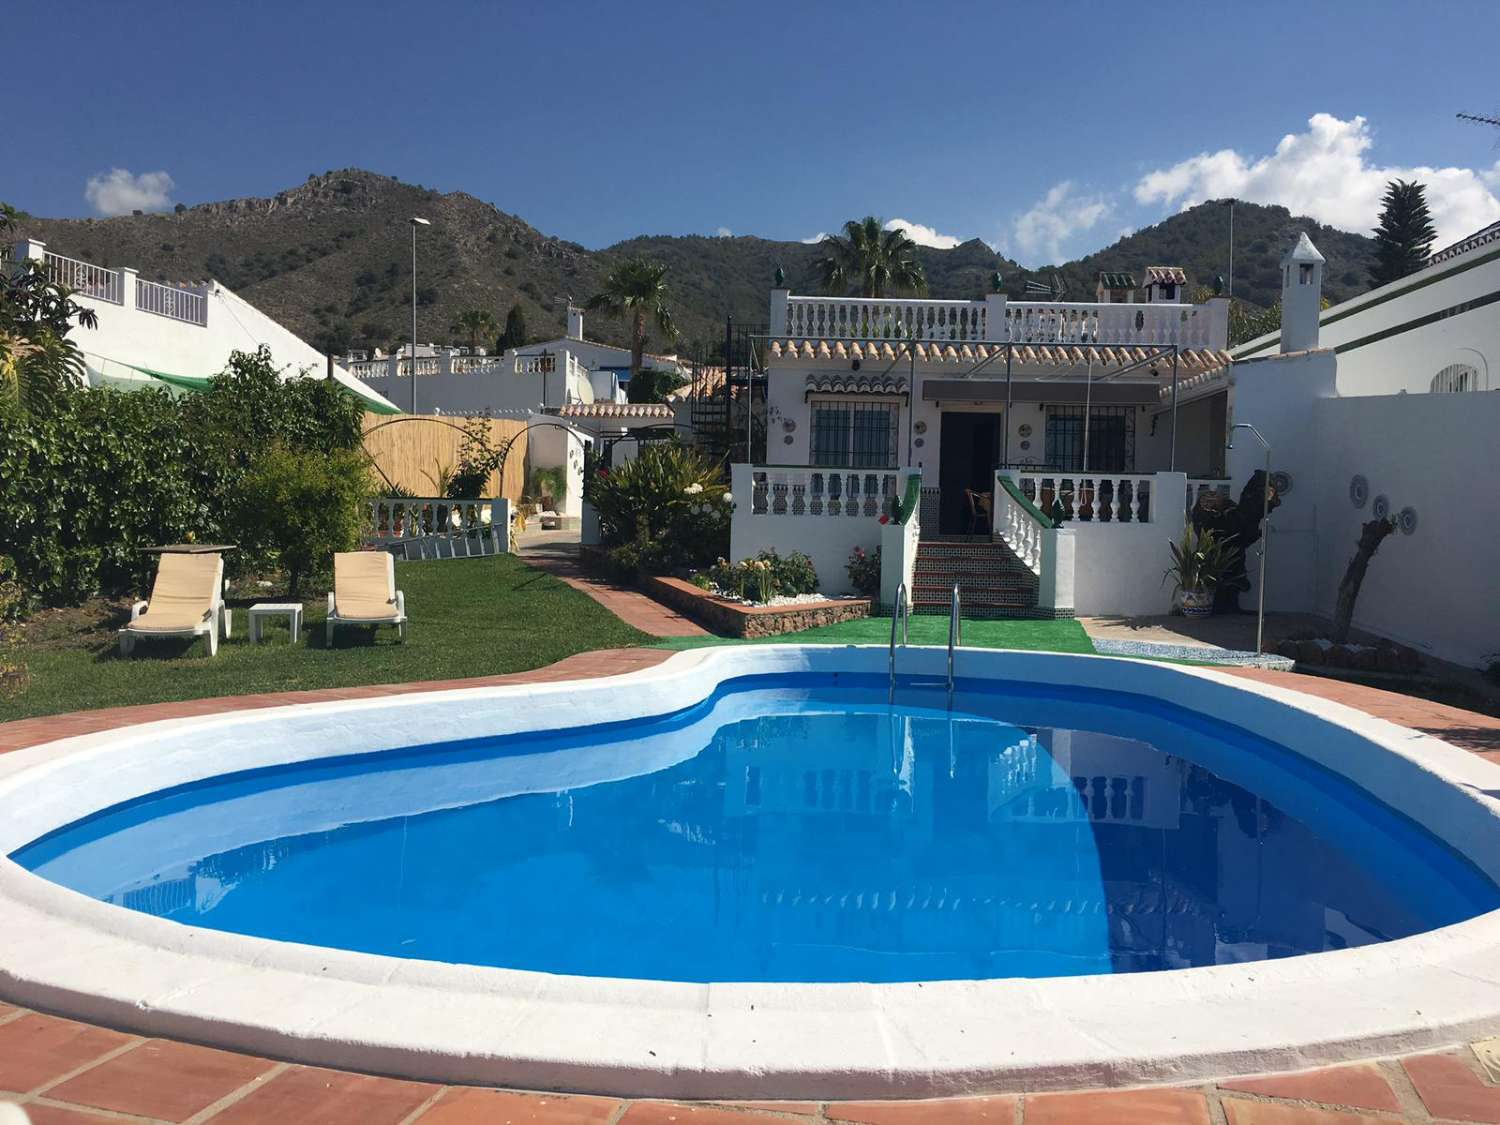 THREE BEDROOM VILLA WITH LARGE GARDEN AND POOL AREA AND SEA VIEWS